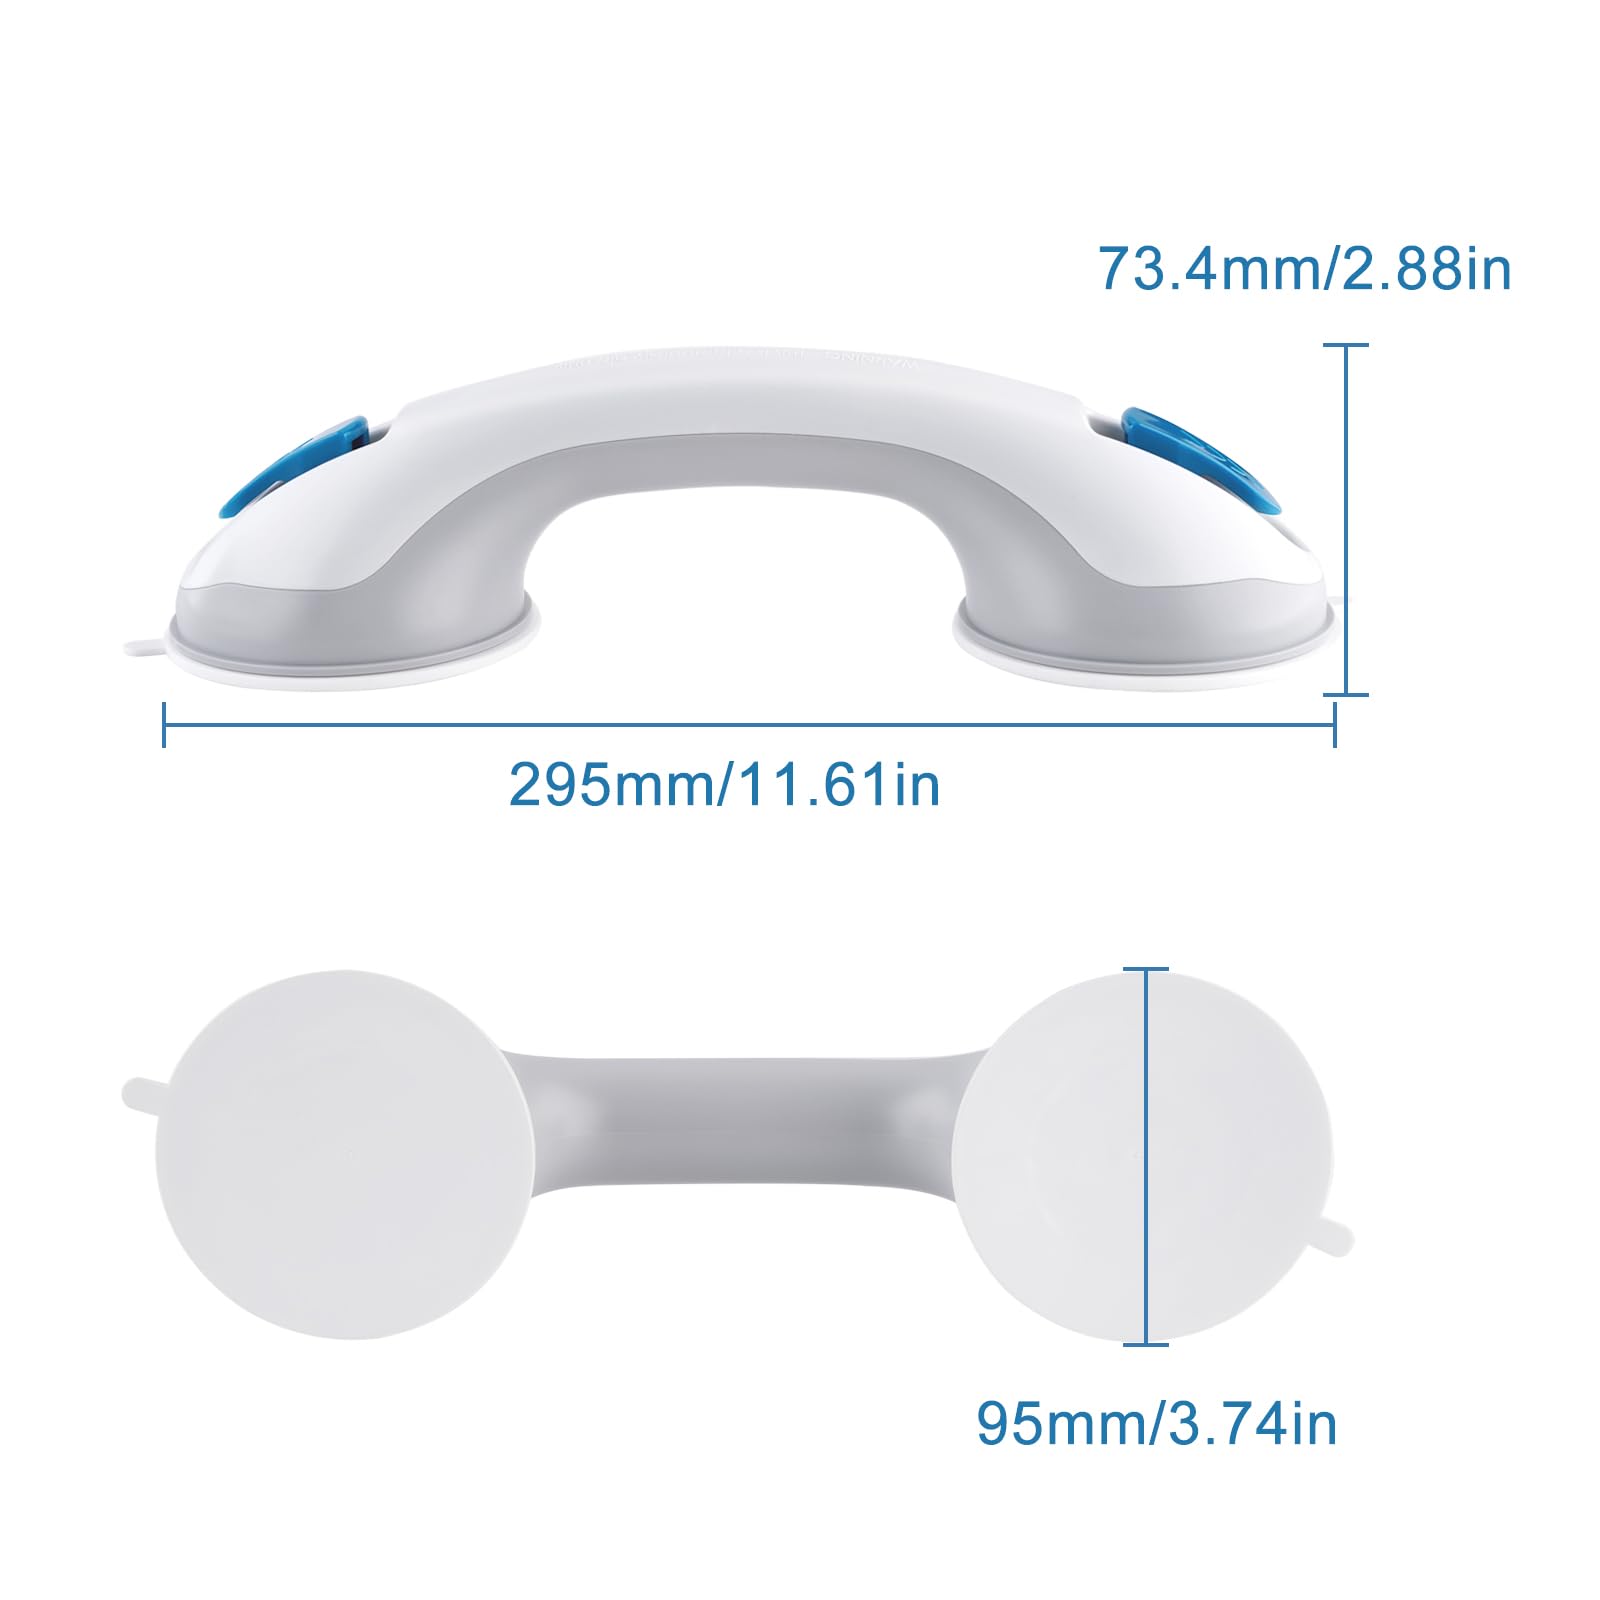 Grab Bars for Bathtubs and Showers- Hotodeal Strong Hold Suction Cup Handle